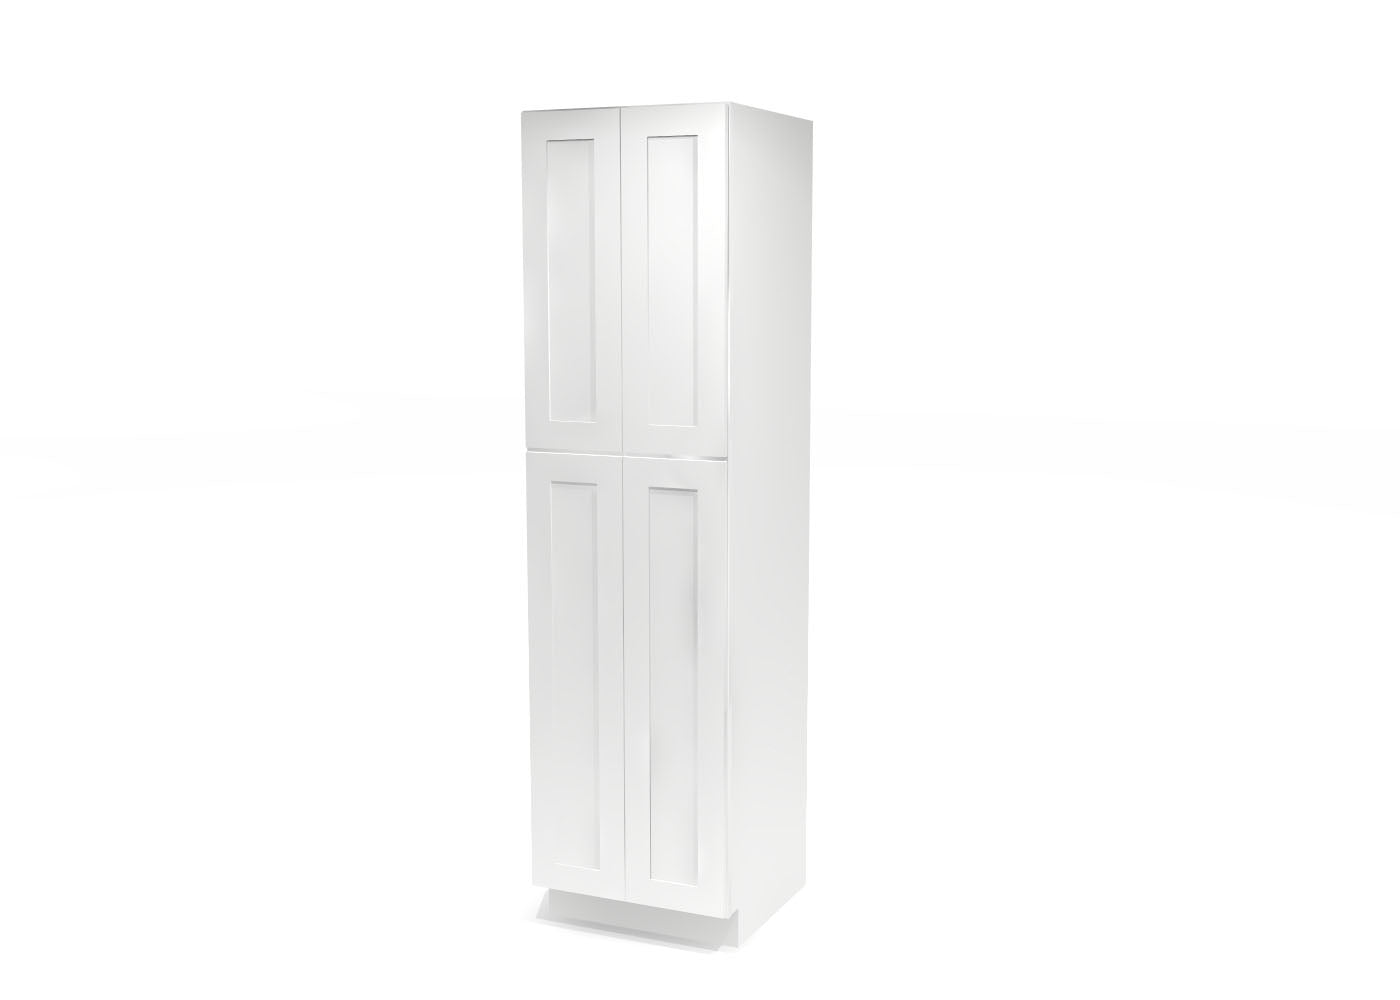 Utility Pantry Double Door 90" by 24" Wide White Shaker Cabinet